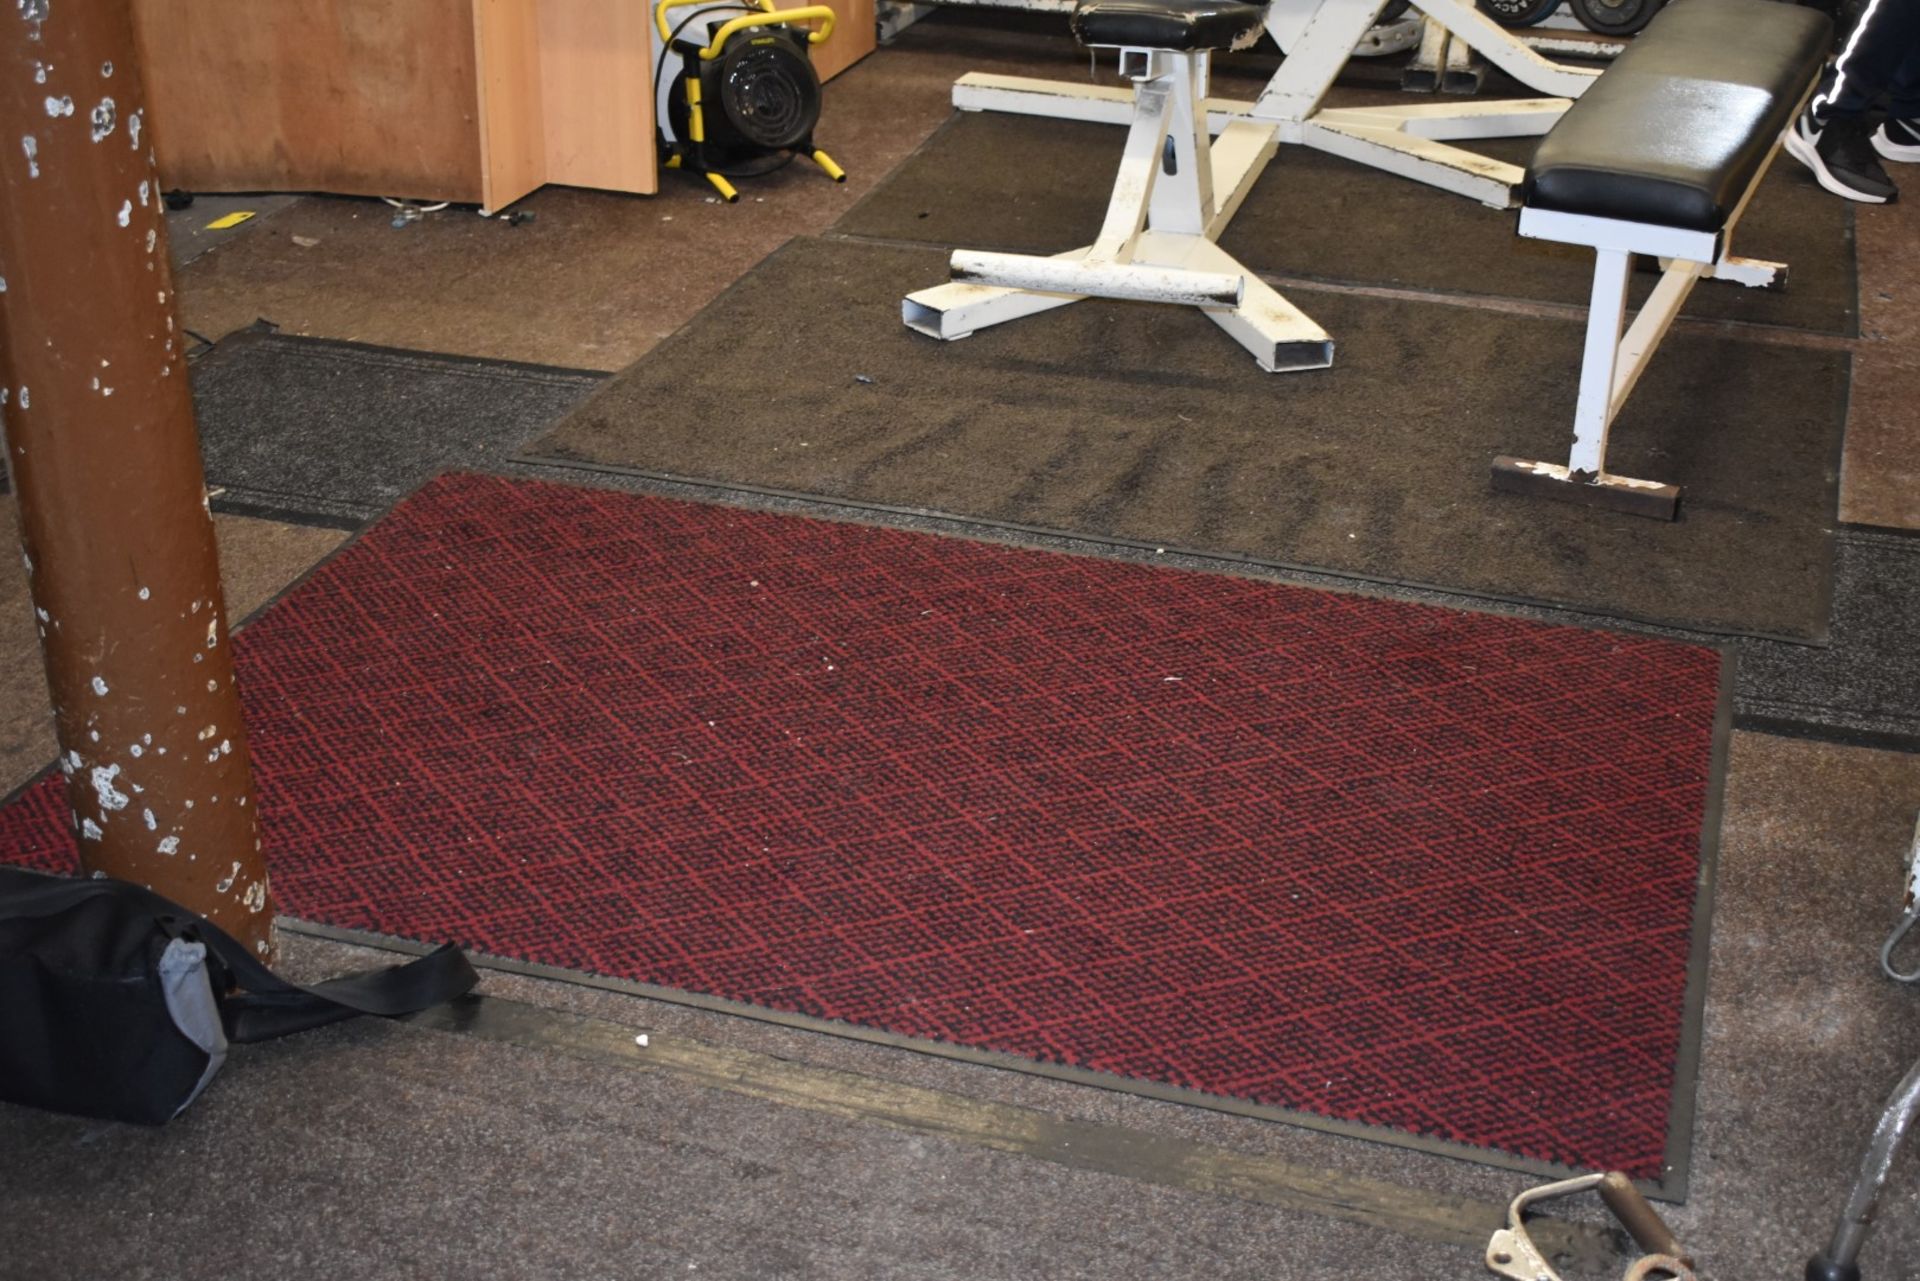 Contents of Bodybuilding and Strongman Gym - Includes Approx 30 Pieces of Gym Equipment, Floor Mats, - Image 95 of 95